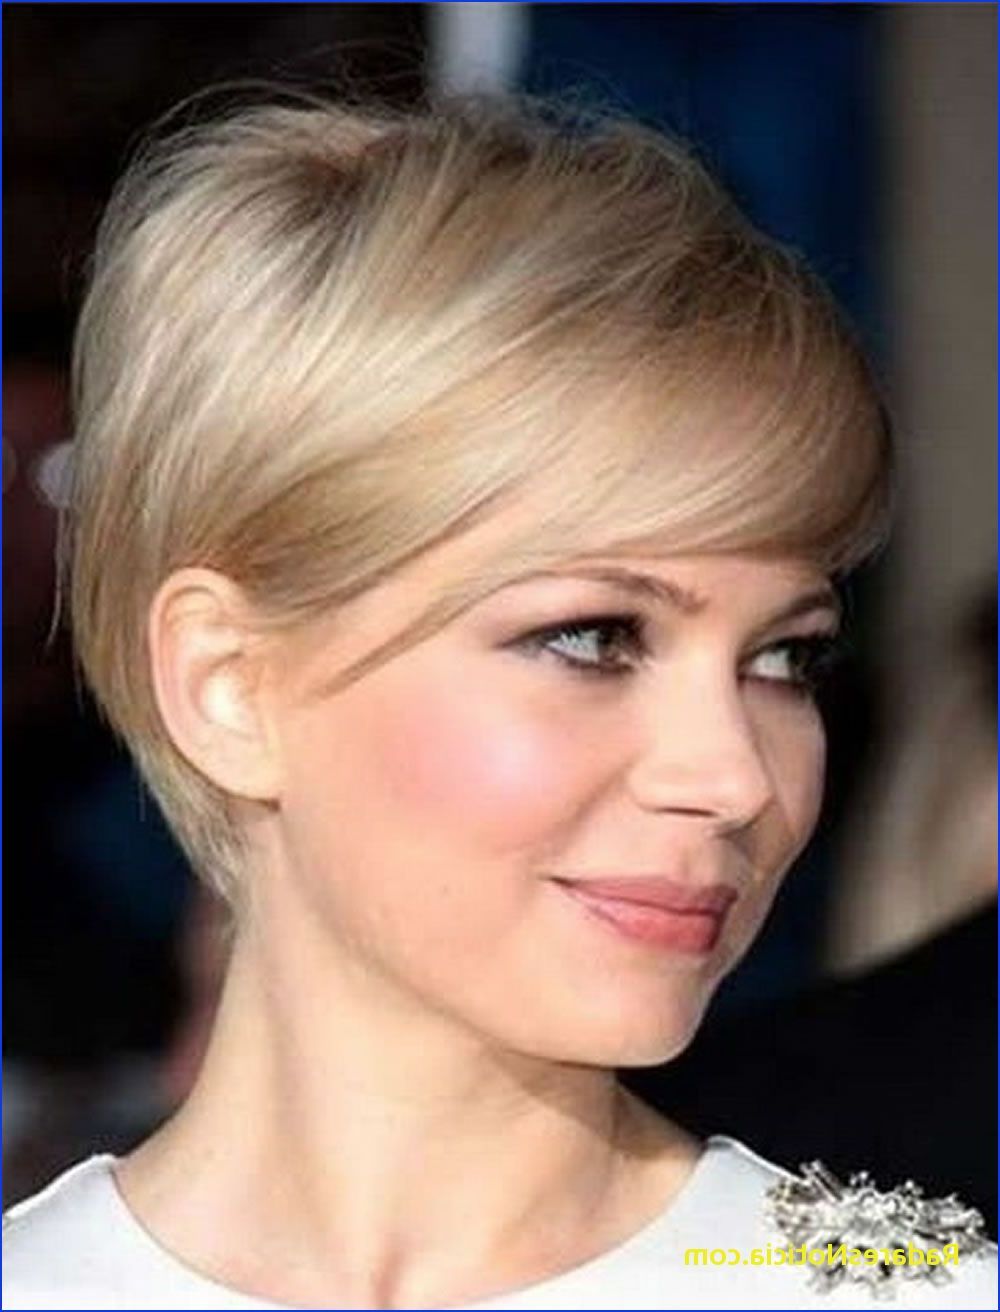 Short Hairstyles For Round Faces Short Hairstyles For Round Faces With Short Hairstyles For Thin Hair And Round Faces (View 14 of 25)